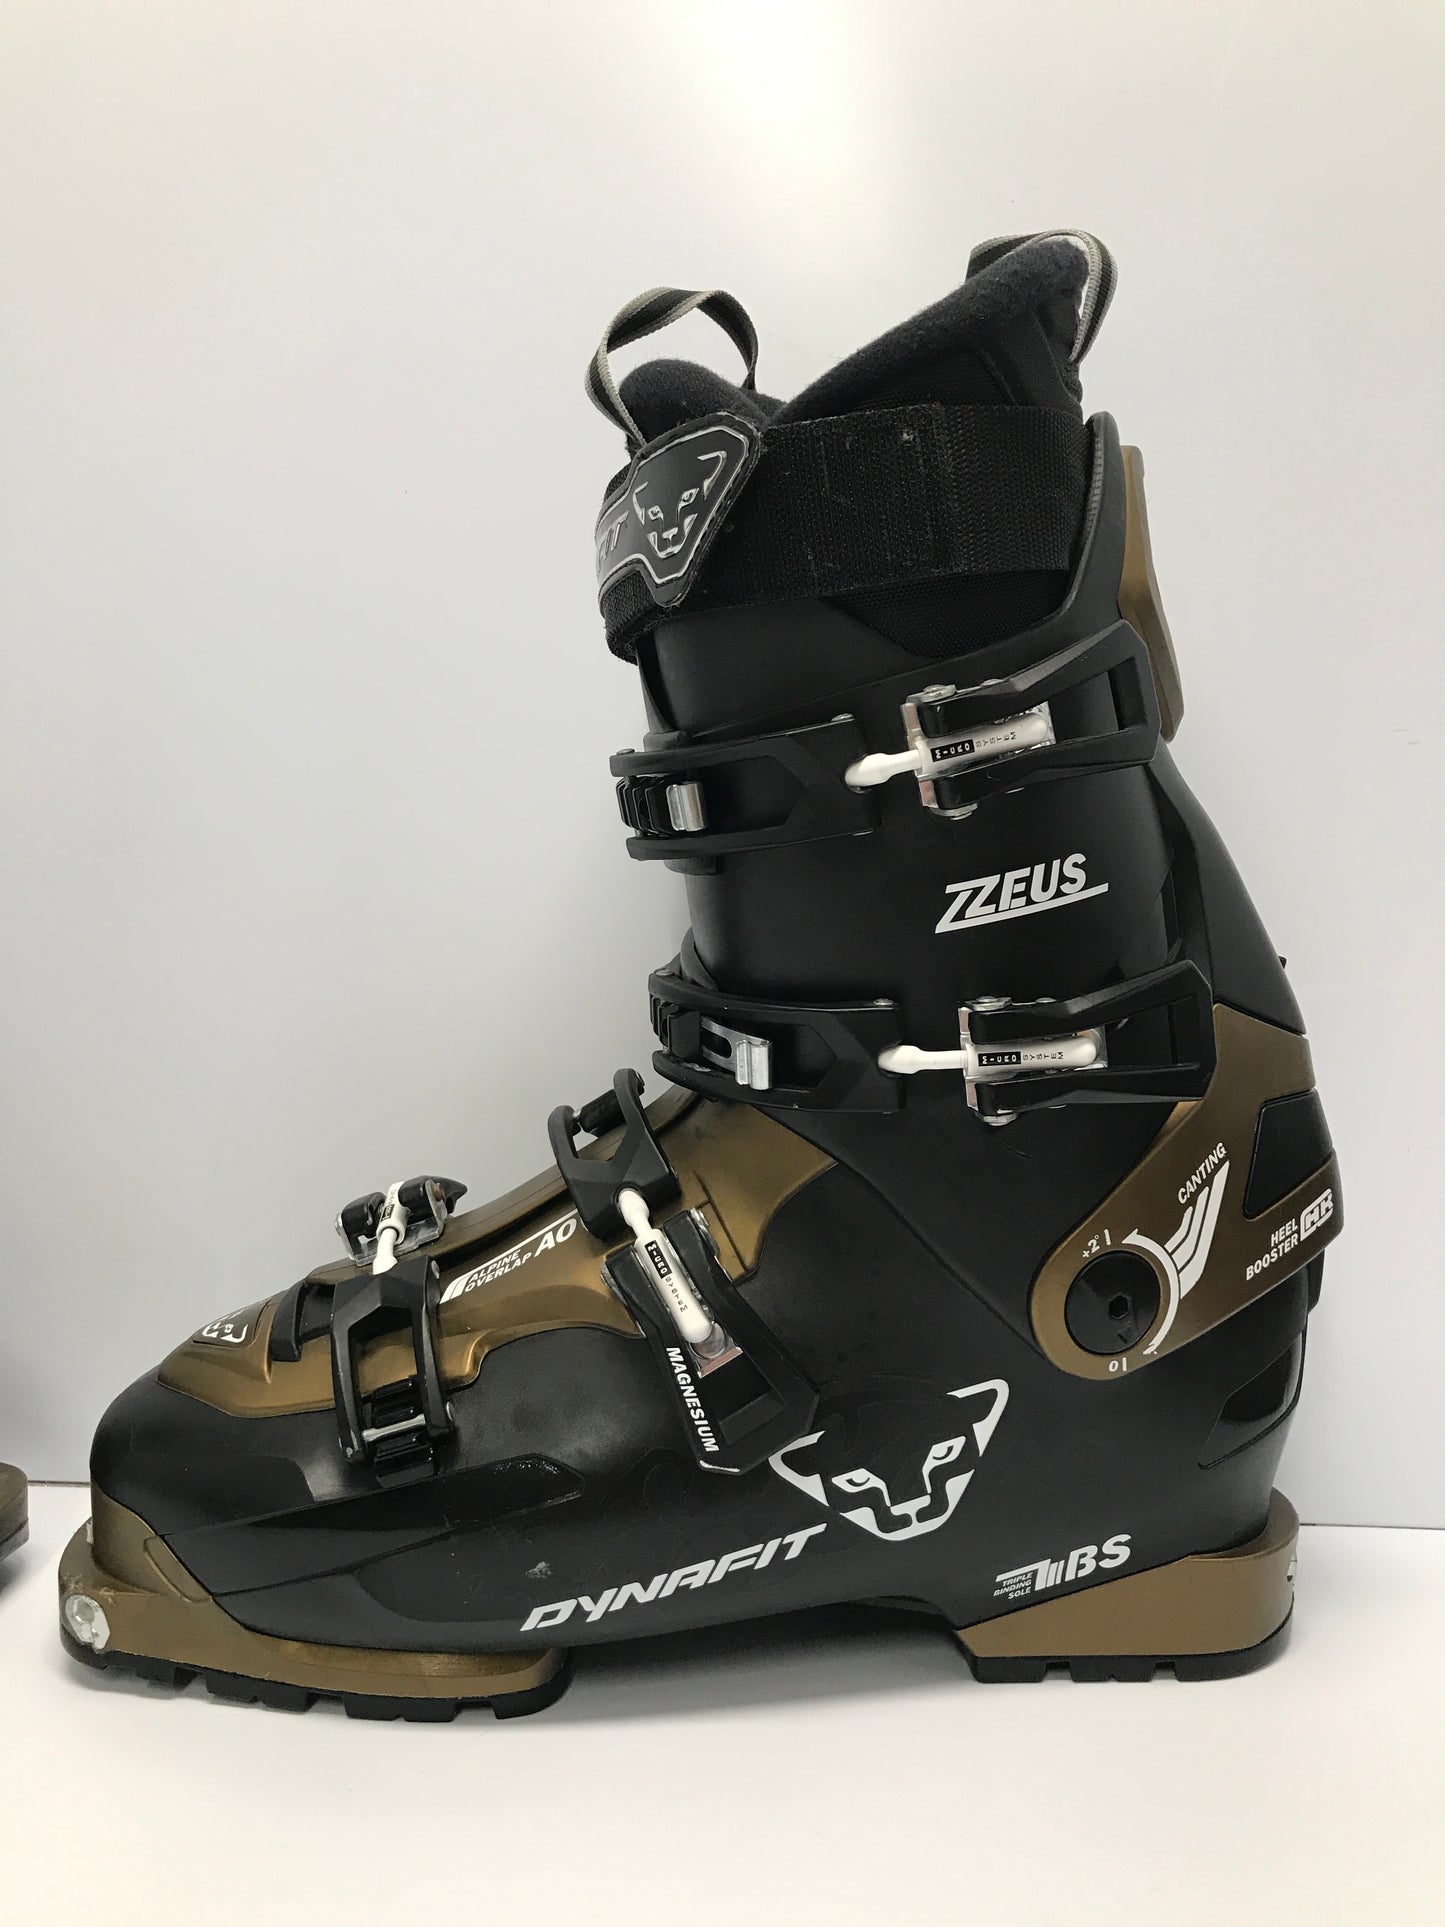 Ski Boots 28.0 Men's Size 10 322 mm Alpine Backcountry Touring Dynafit Zzeus TFX Outstanding Quality Like New